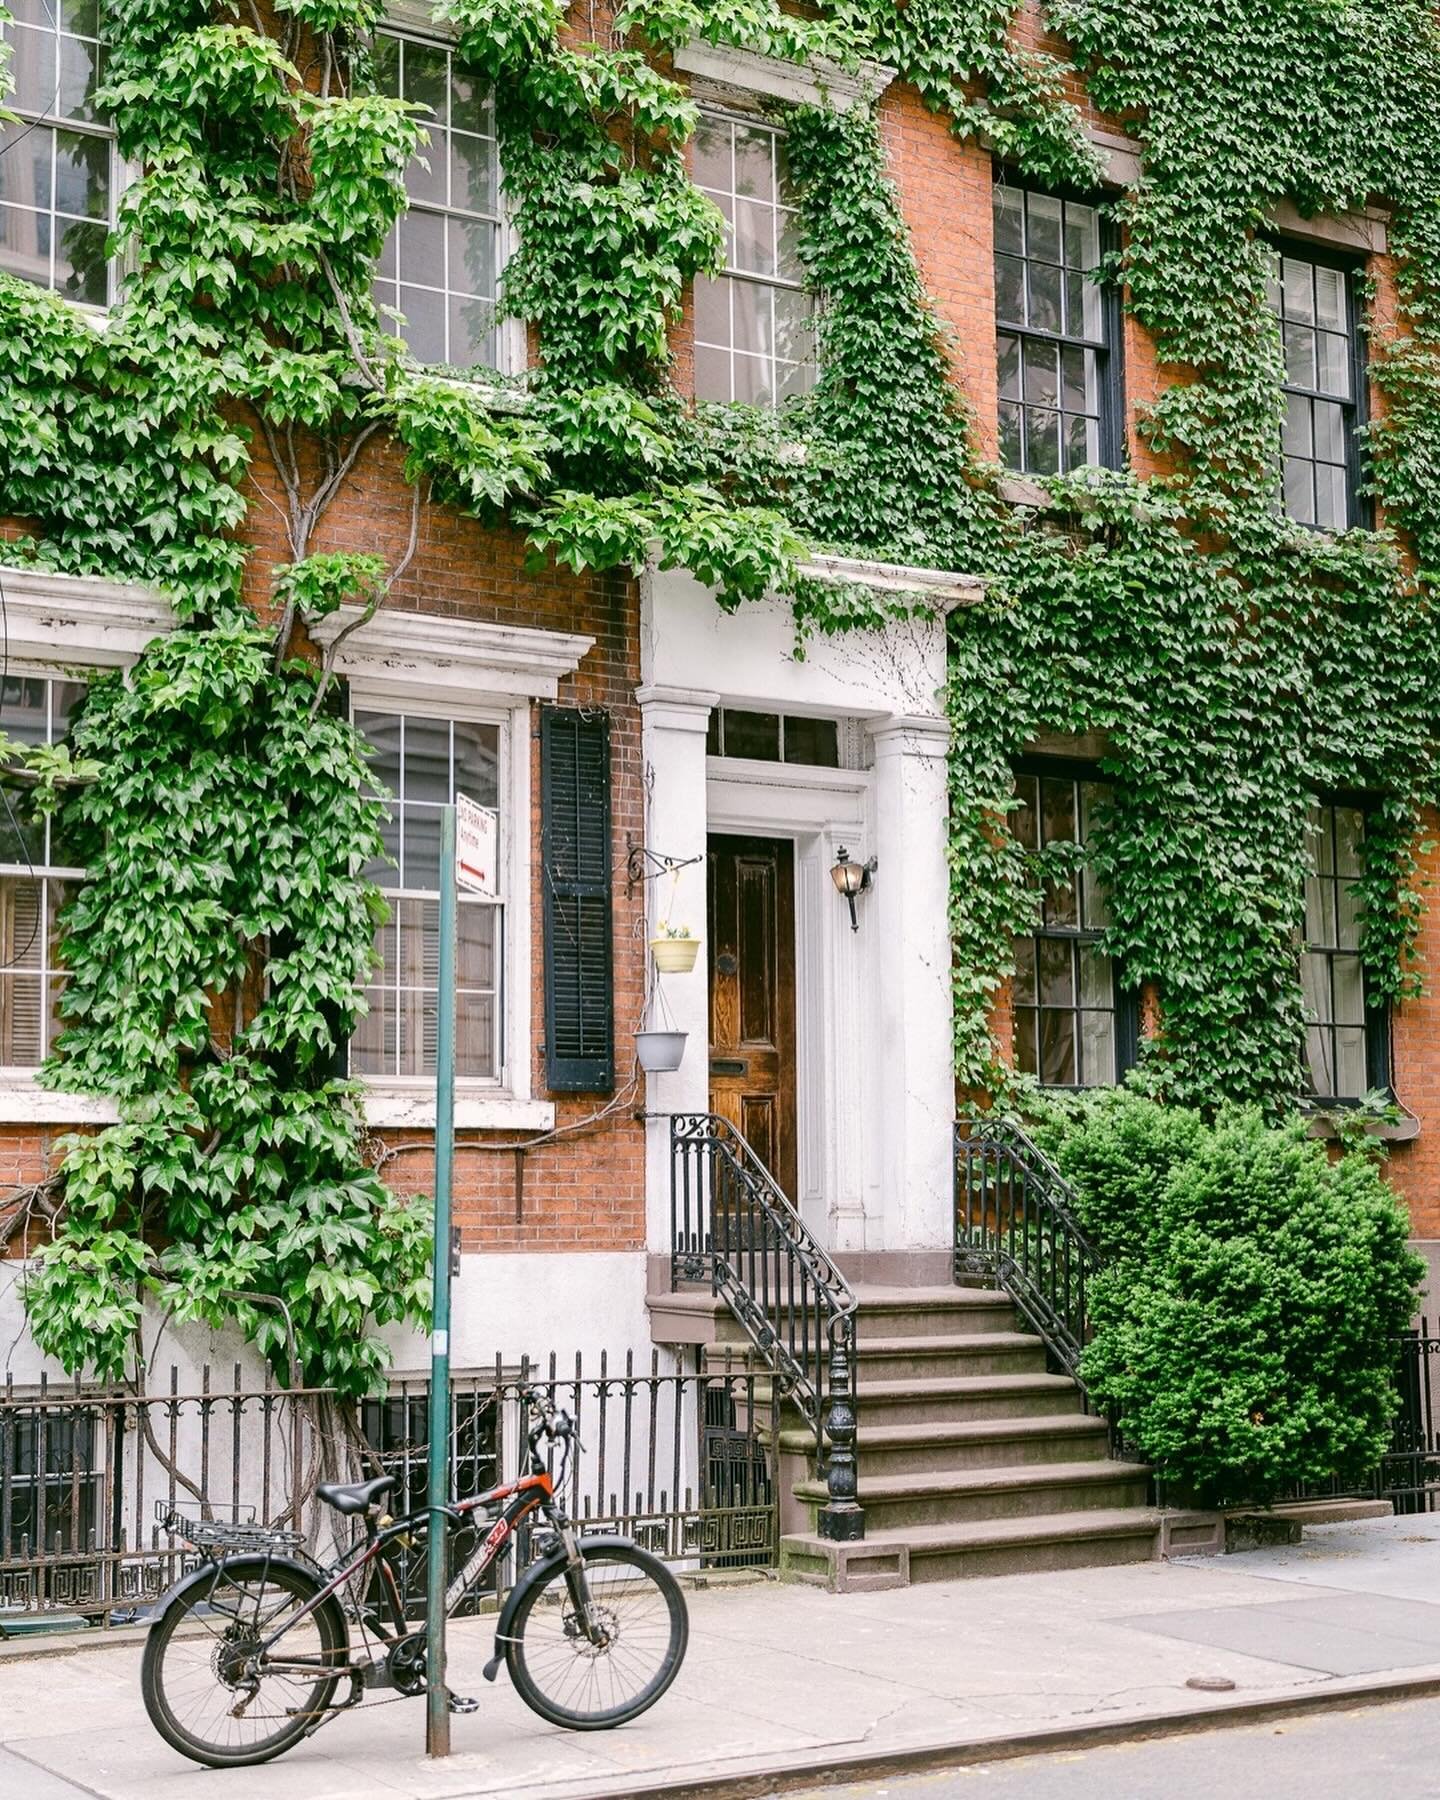 This is my favorite time of the year to visit New York City, right when everything turns green again.  Nothing like walking through the city, finding quaint and charming spots at every turn, especially in the West Village where we took Liz &amp; Rick